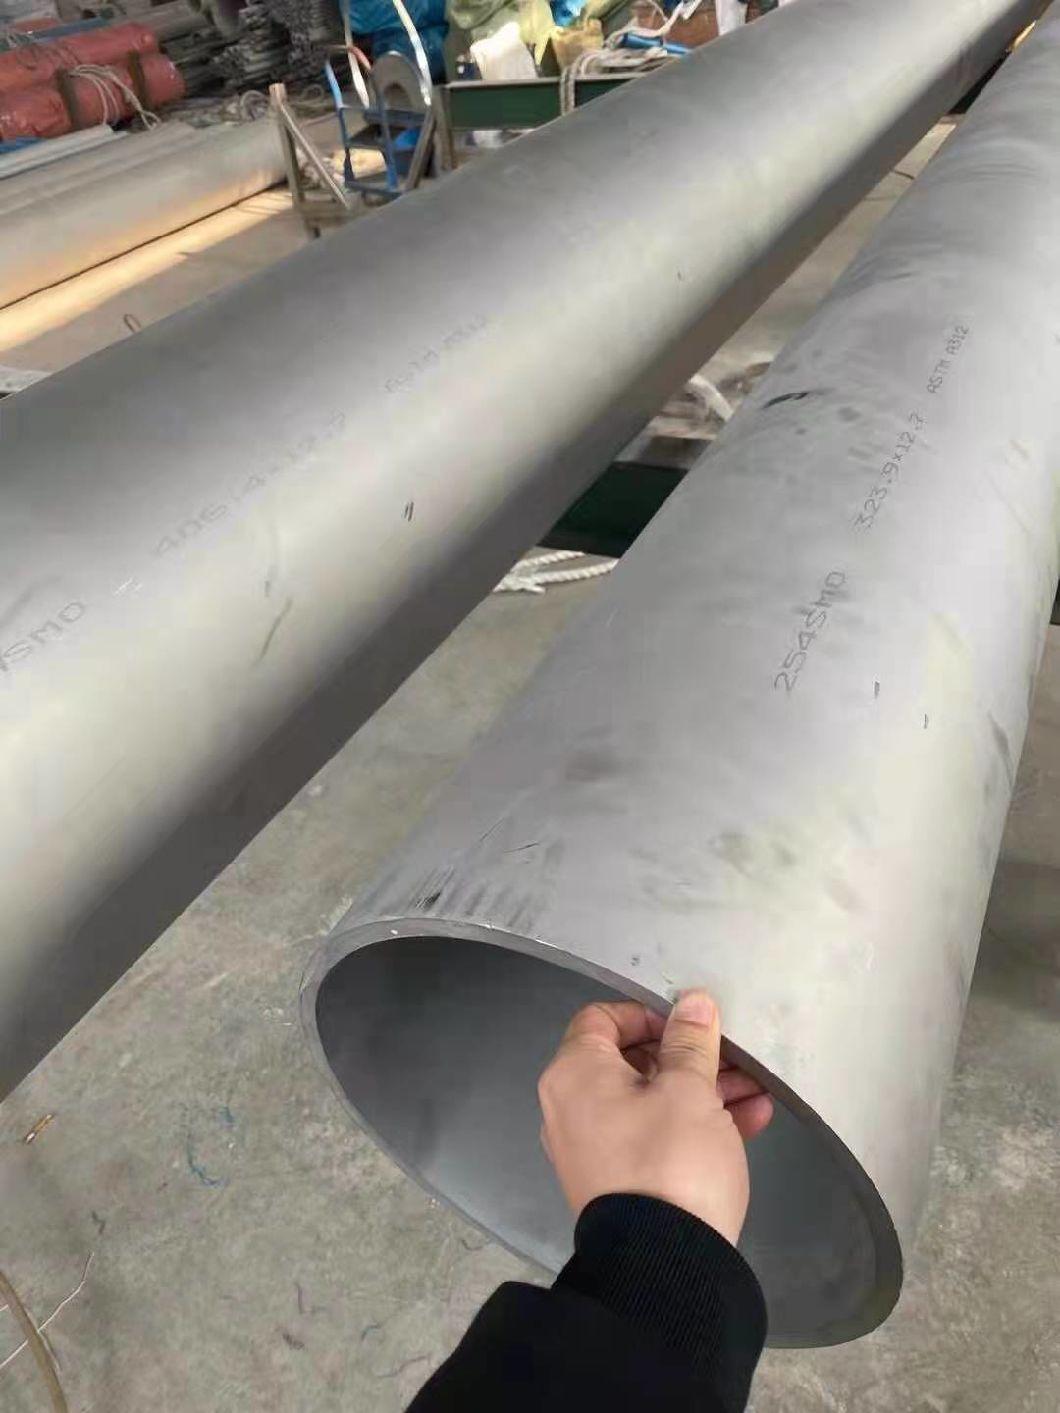 304 316 Stainless Steel Pipe